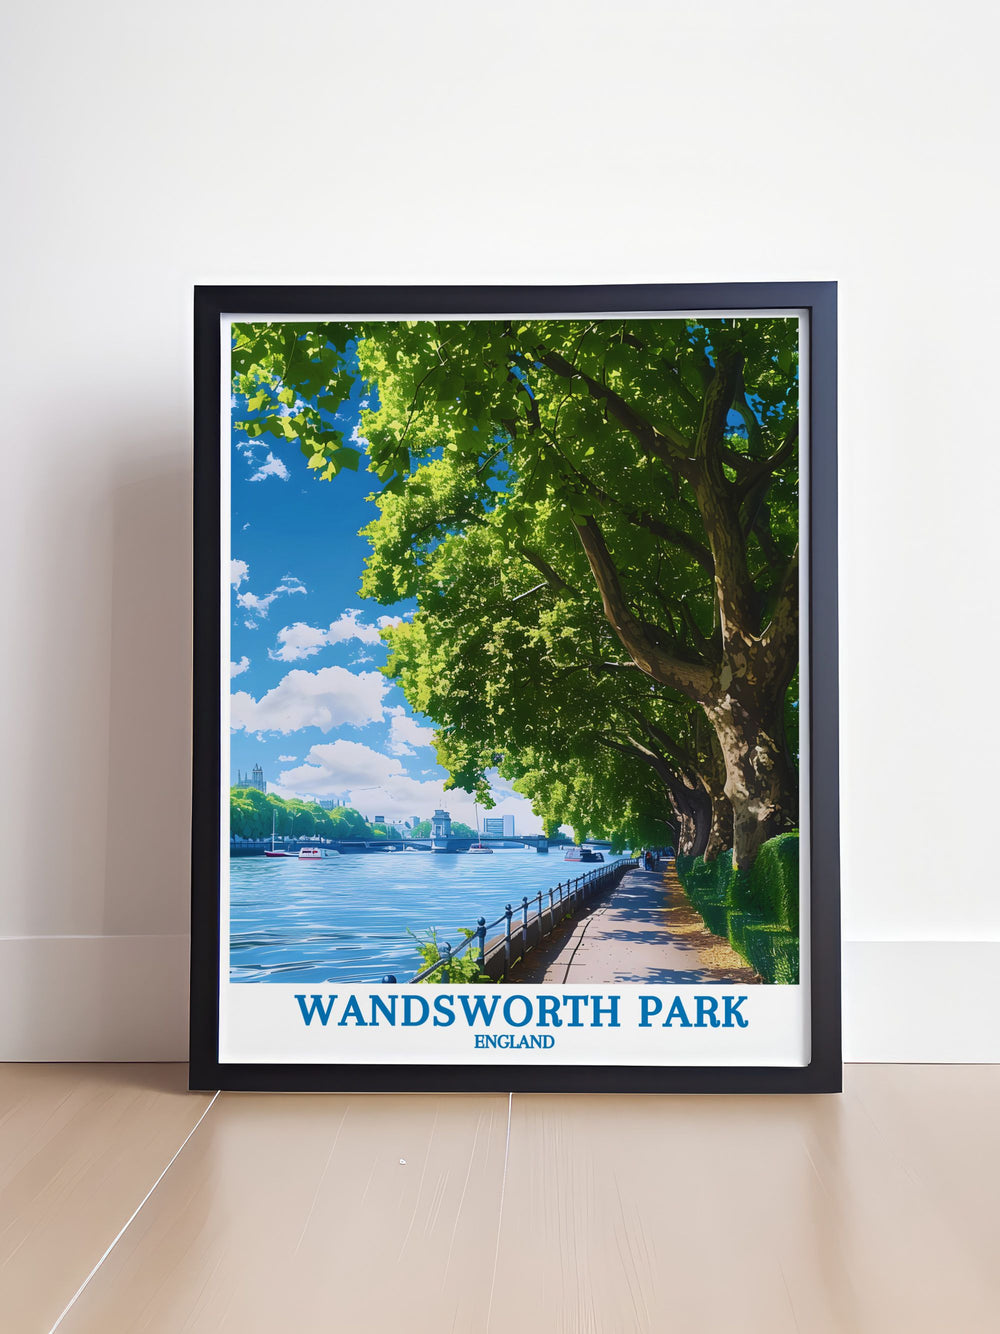 This fine art print of Wandsworth Park features the picturesque riverside walk, offering a glimpse into the parks serene landscapes and vibrant greenery. A wonderful piece for adding a touch of Londons natural beauty to your home, it celebrates the parks role as a peaceful retreat and a historical landmark in the city.